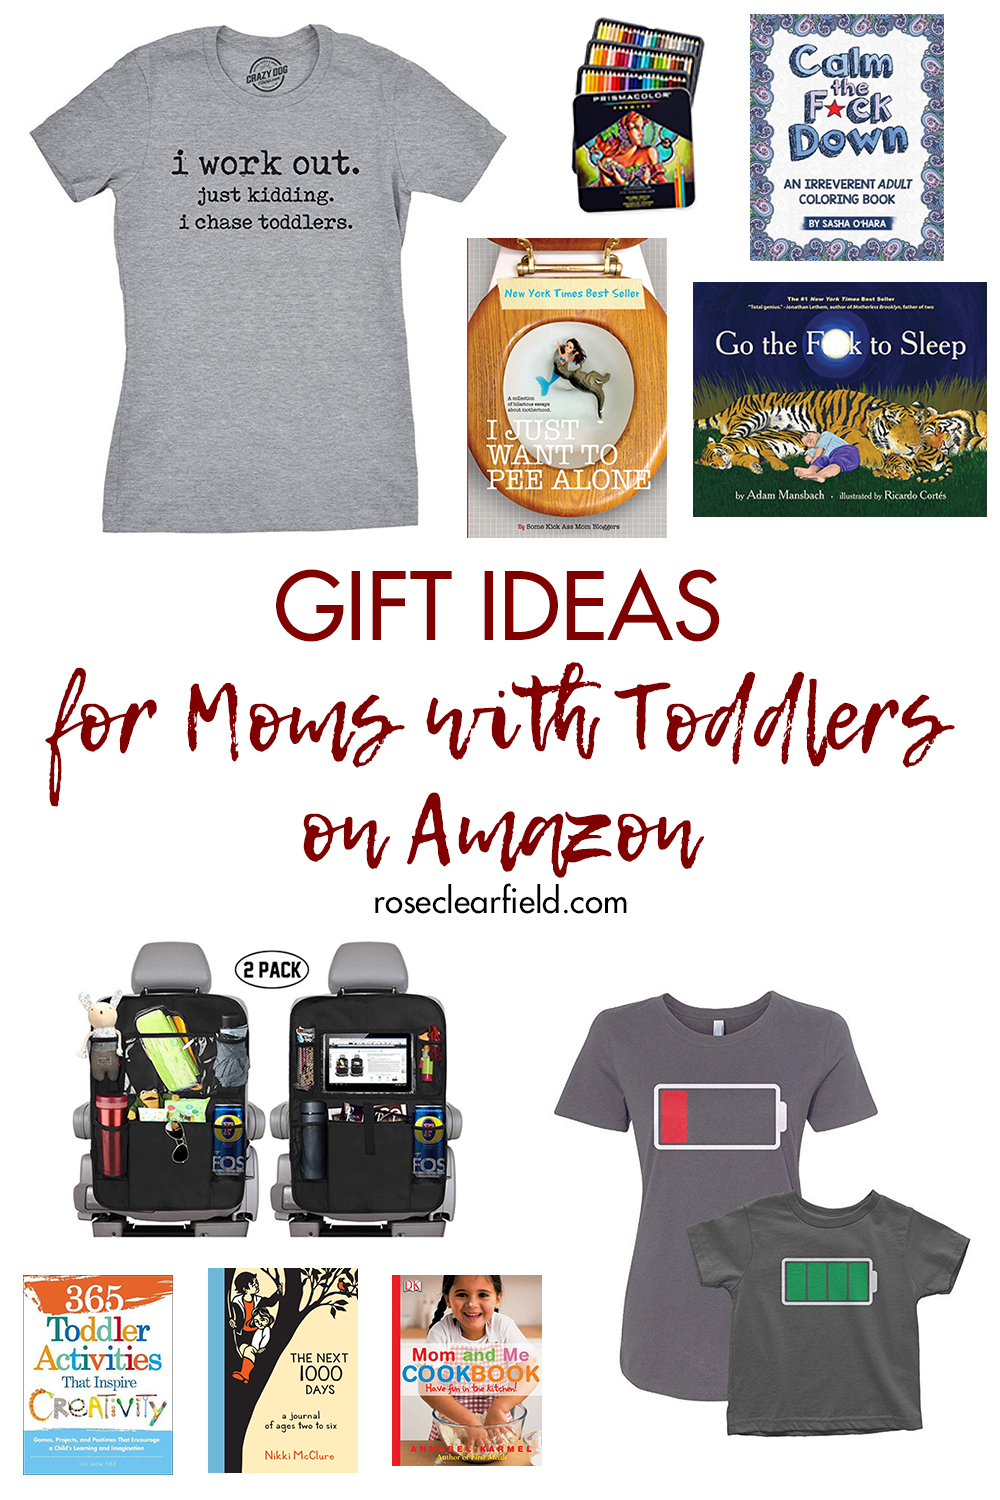 Gift ideas for moms with toddlers on Amazon. Perfect for Christmas, Mother's Day, birthdays, and more! #giftideas #momgiftideas #Amazongiftideas #toddlermoms | https://www.roseclearfield.com